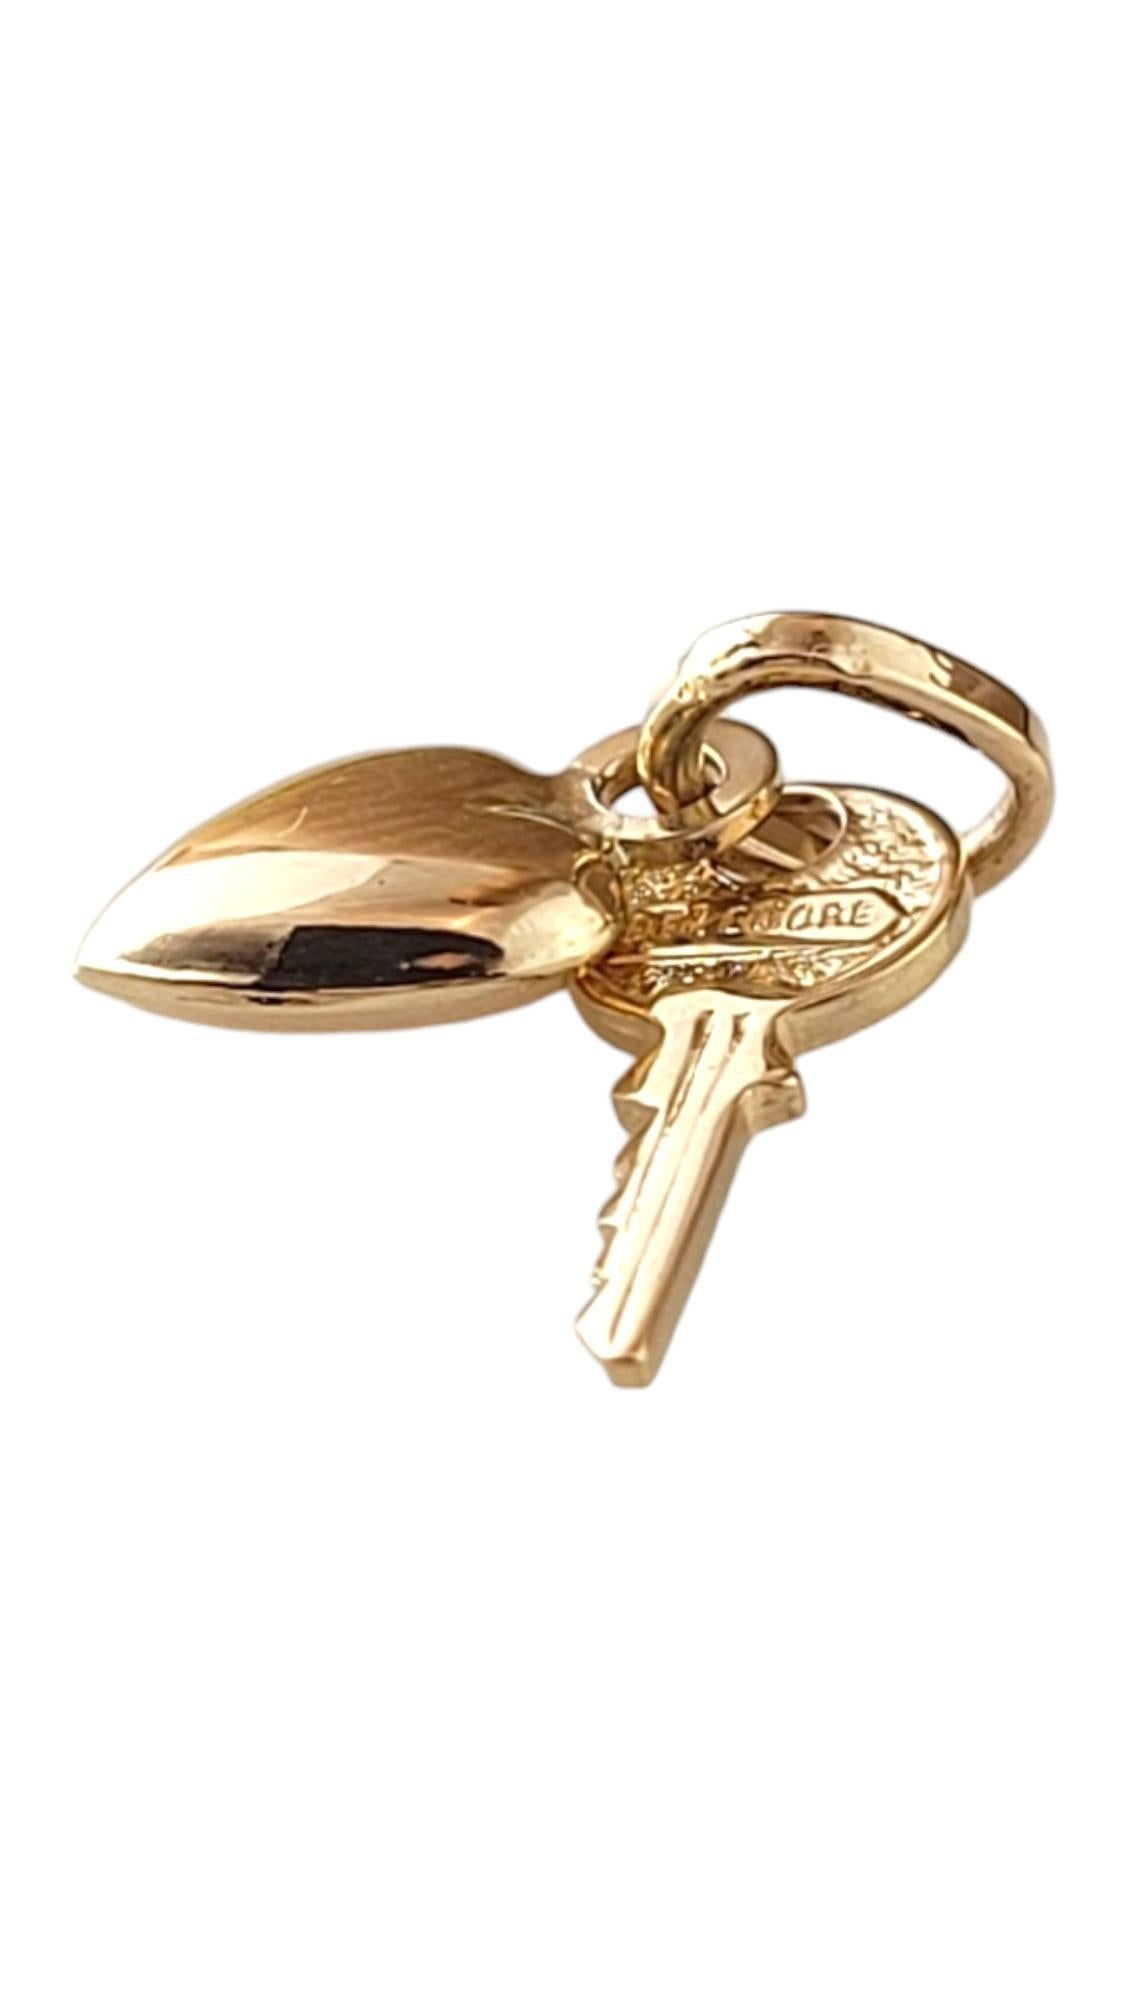 18K Yellow Gold Heart & Key Charm #16880 In Good Condition For Sale In Washington Depot, CT